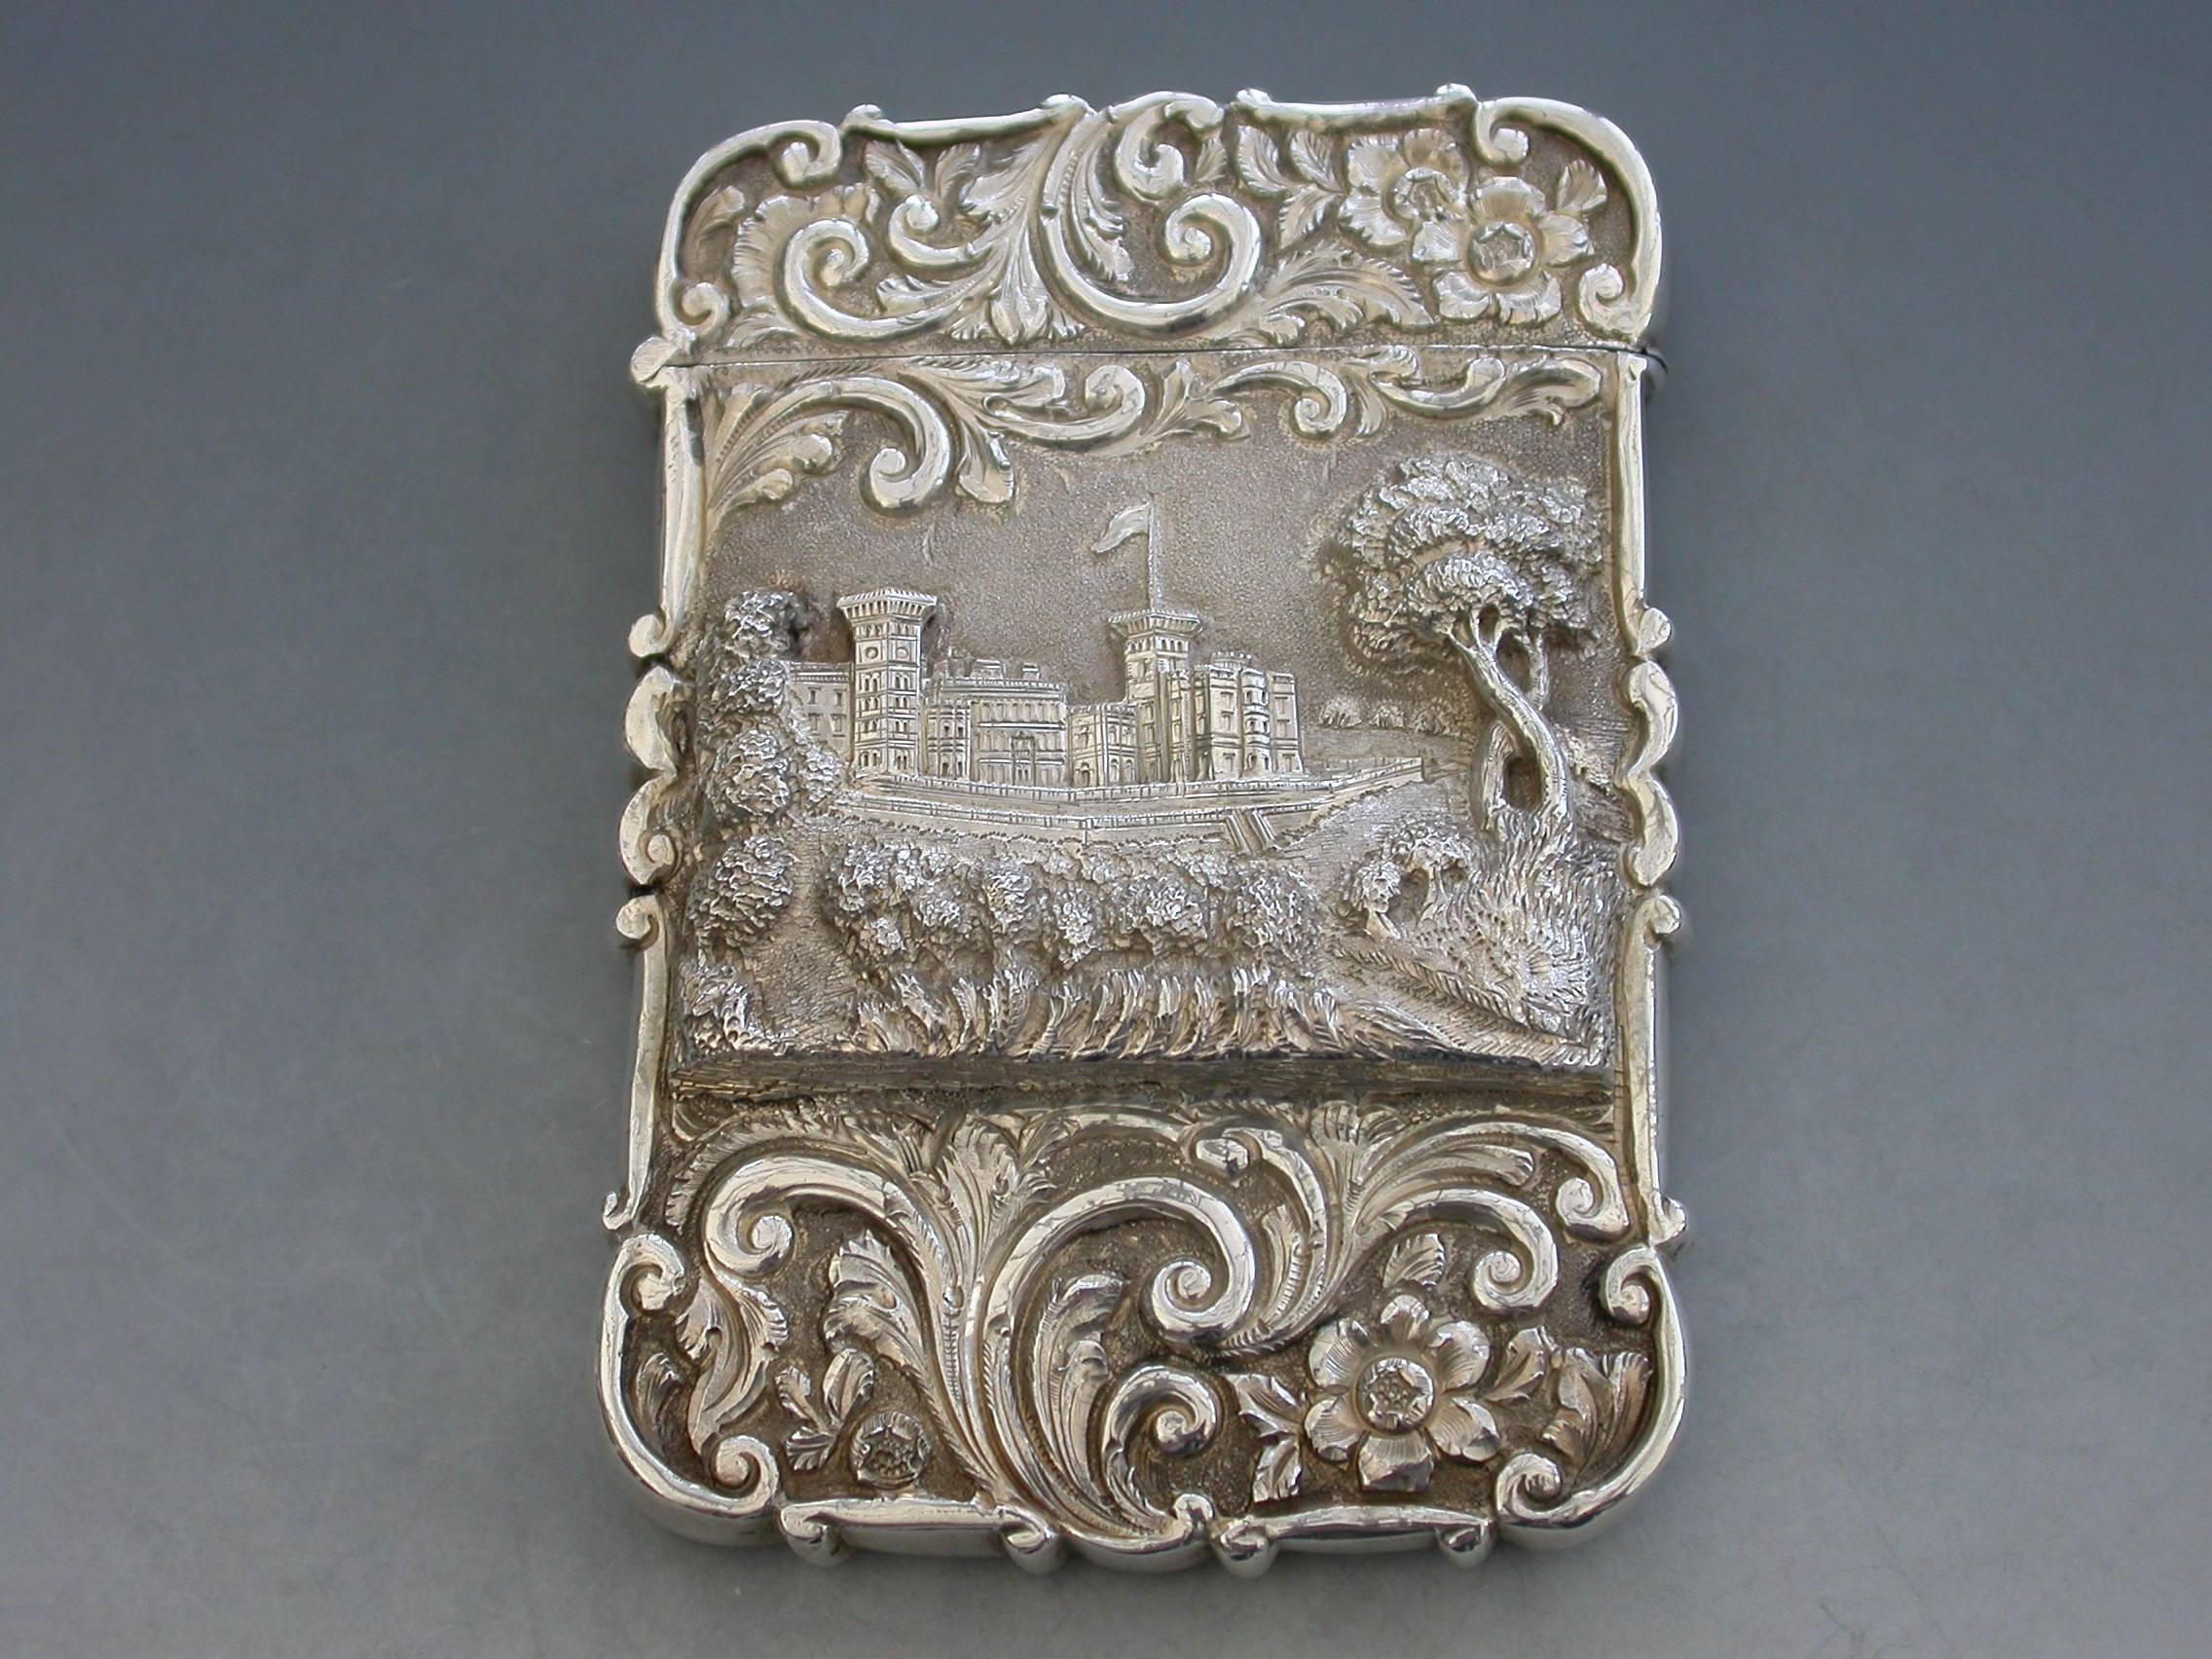 An extremely rare Victorian castle-top card case of shaped rectangular form with chased and embossed foliate scroll decoration, the front with a scene depicting an unusual view of Osborne House from the Shrubbery in high relief. The reverse with a